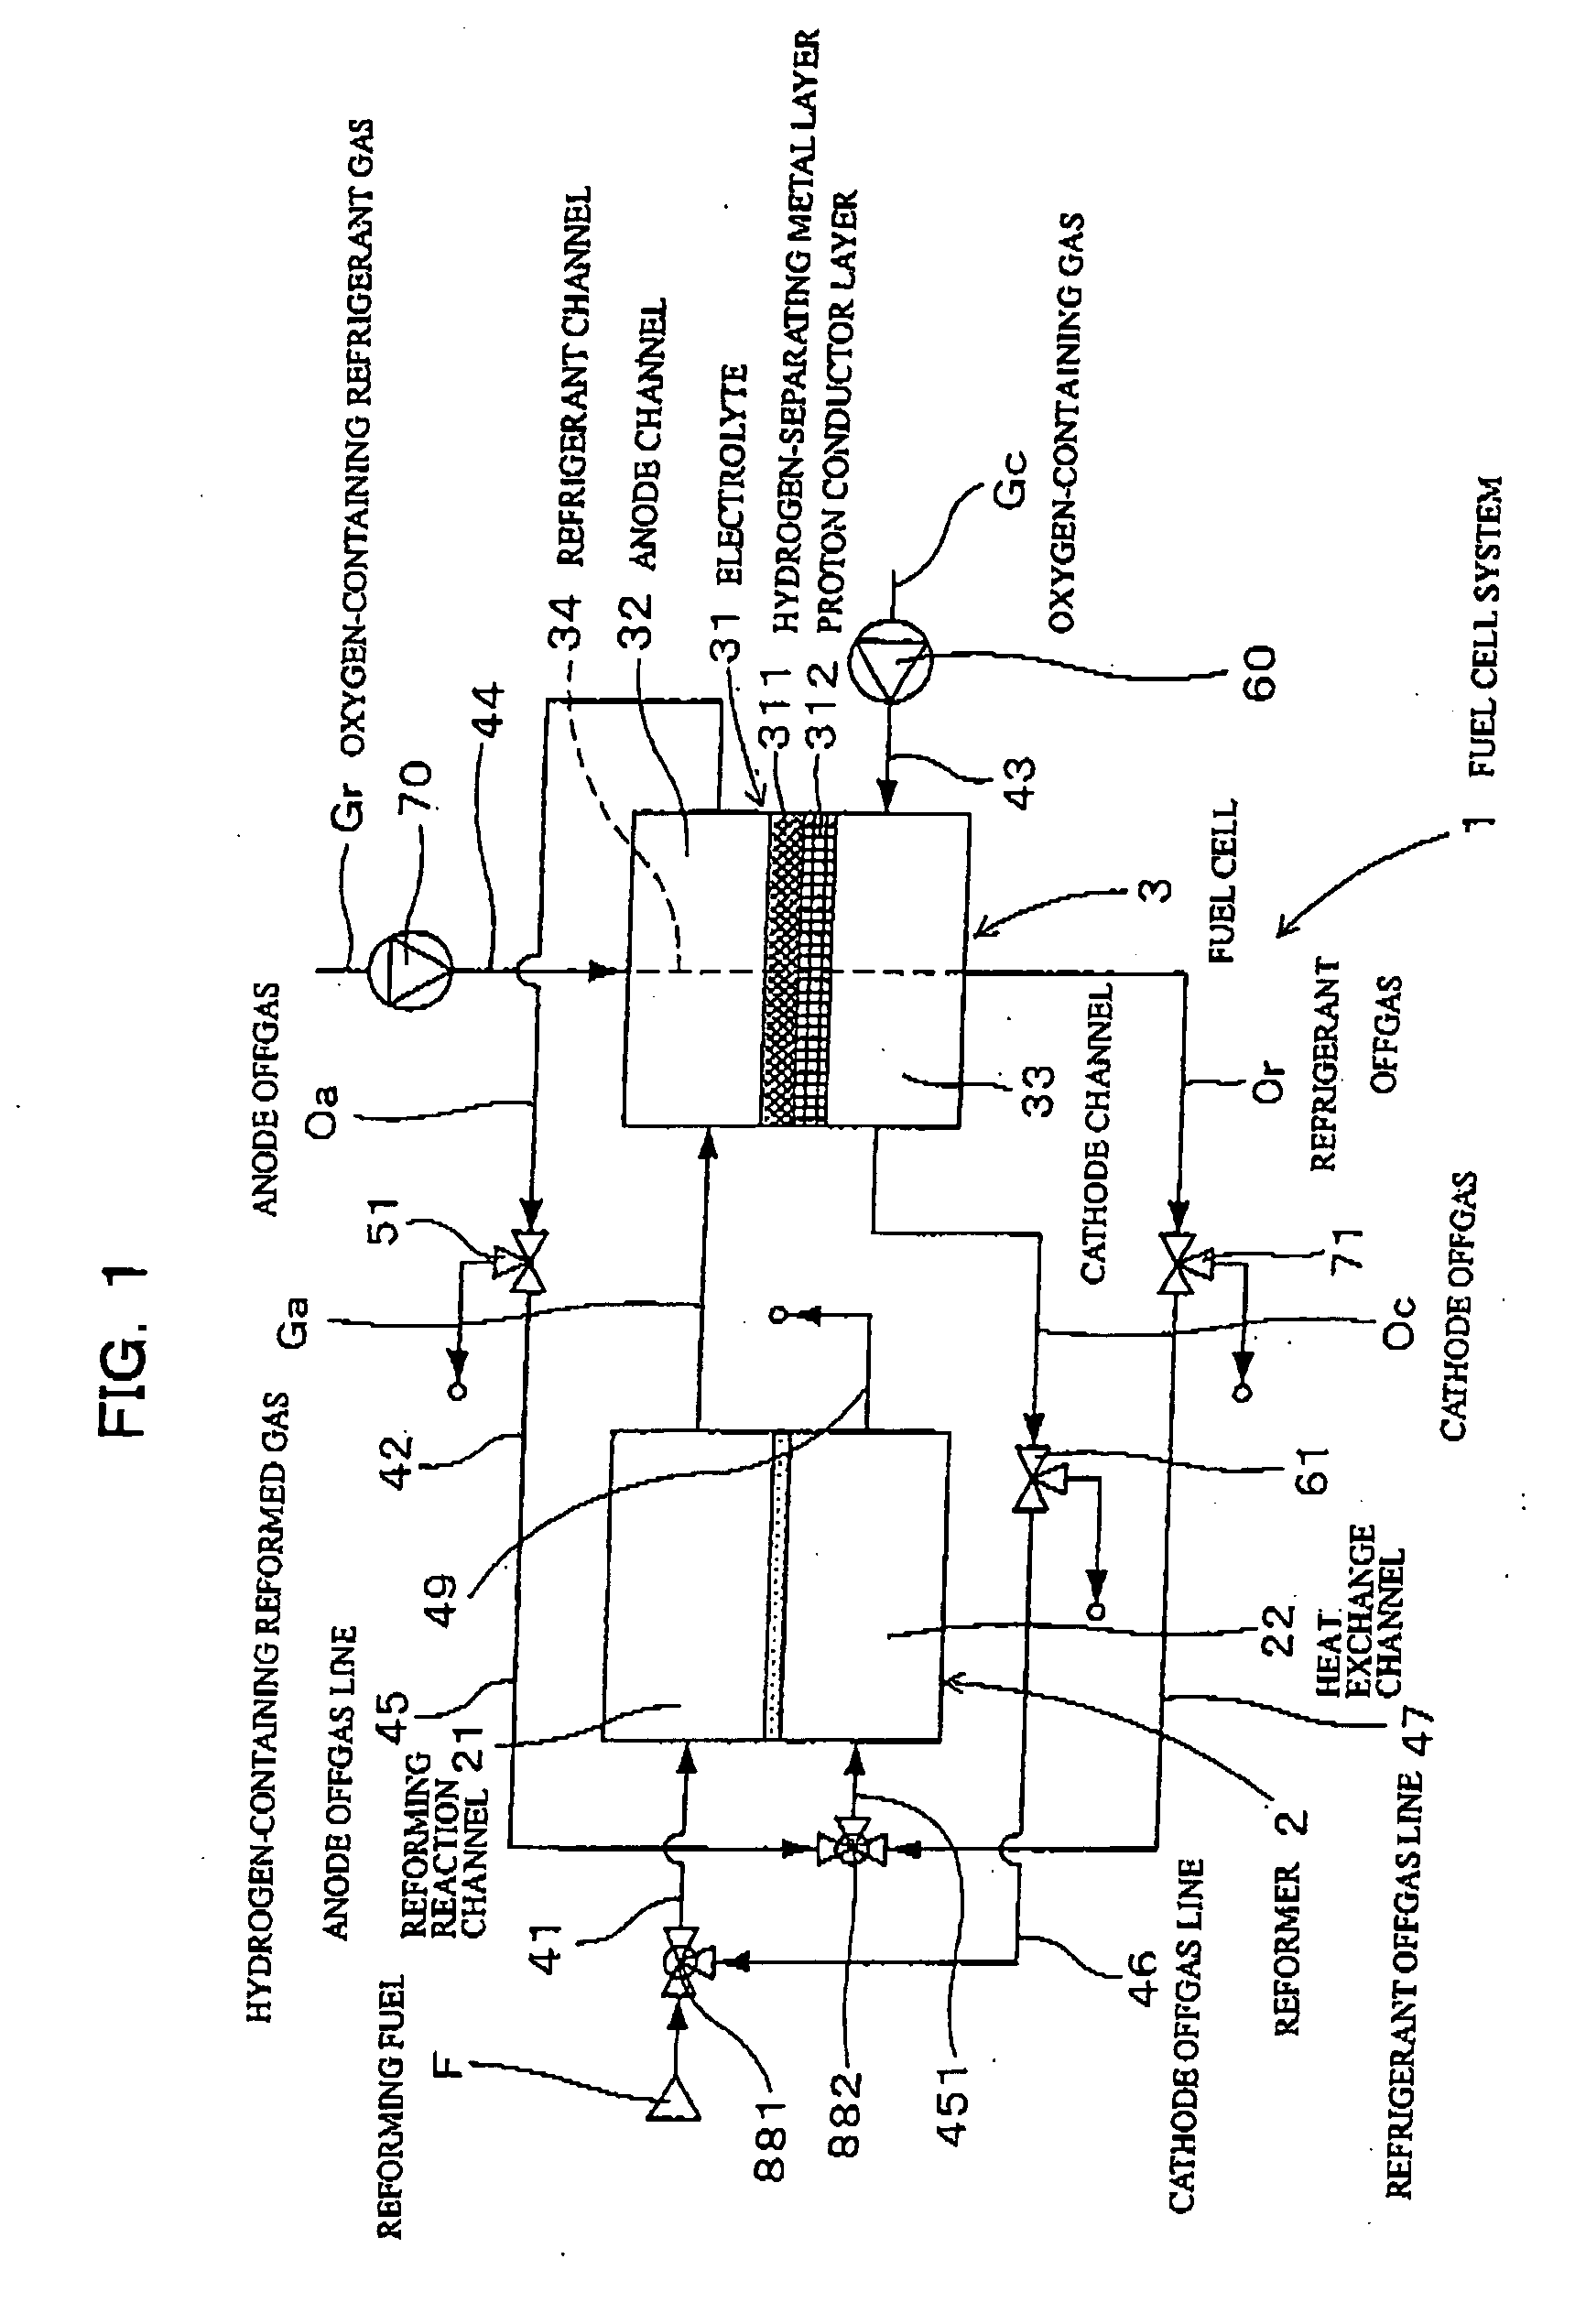 Fuel cell system and method of generating electricity thereby